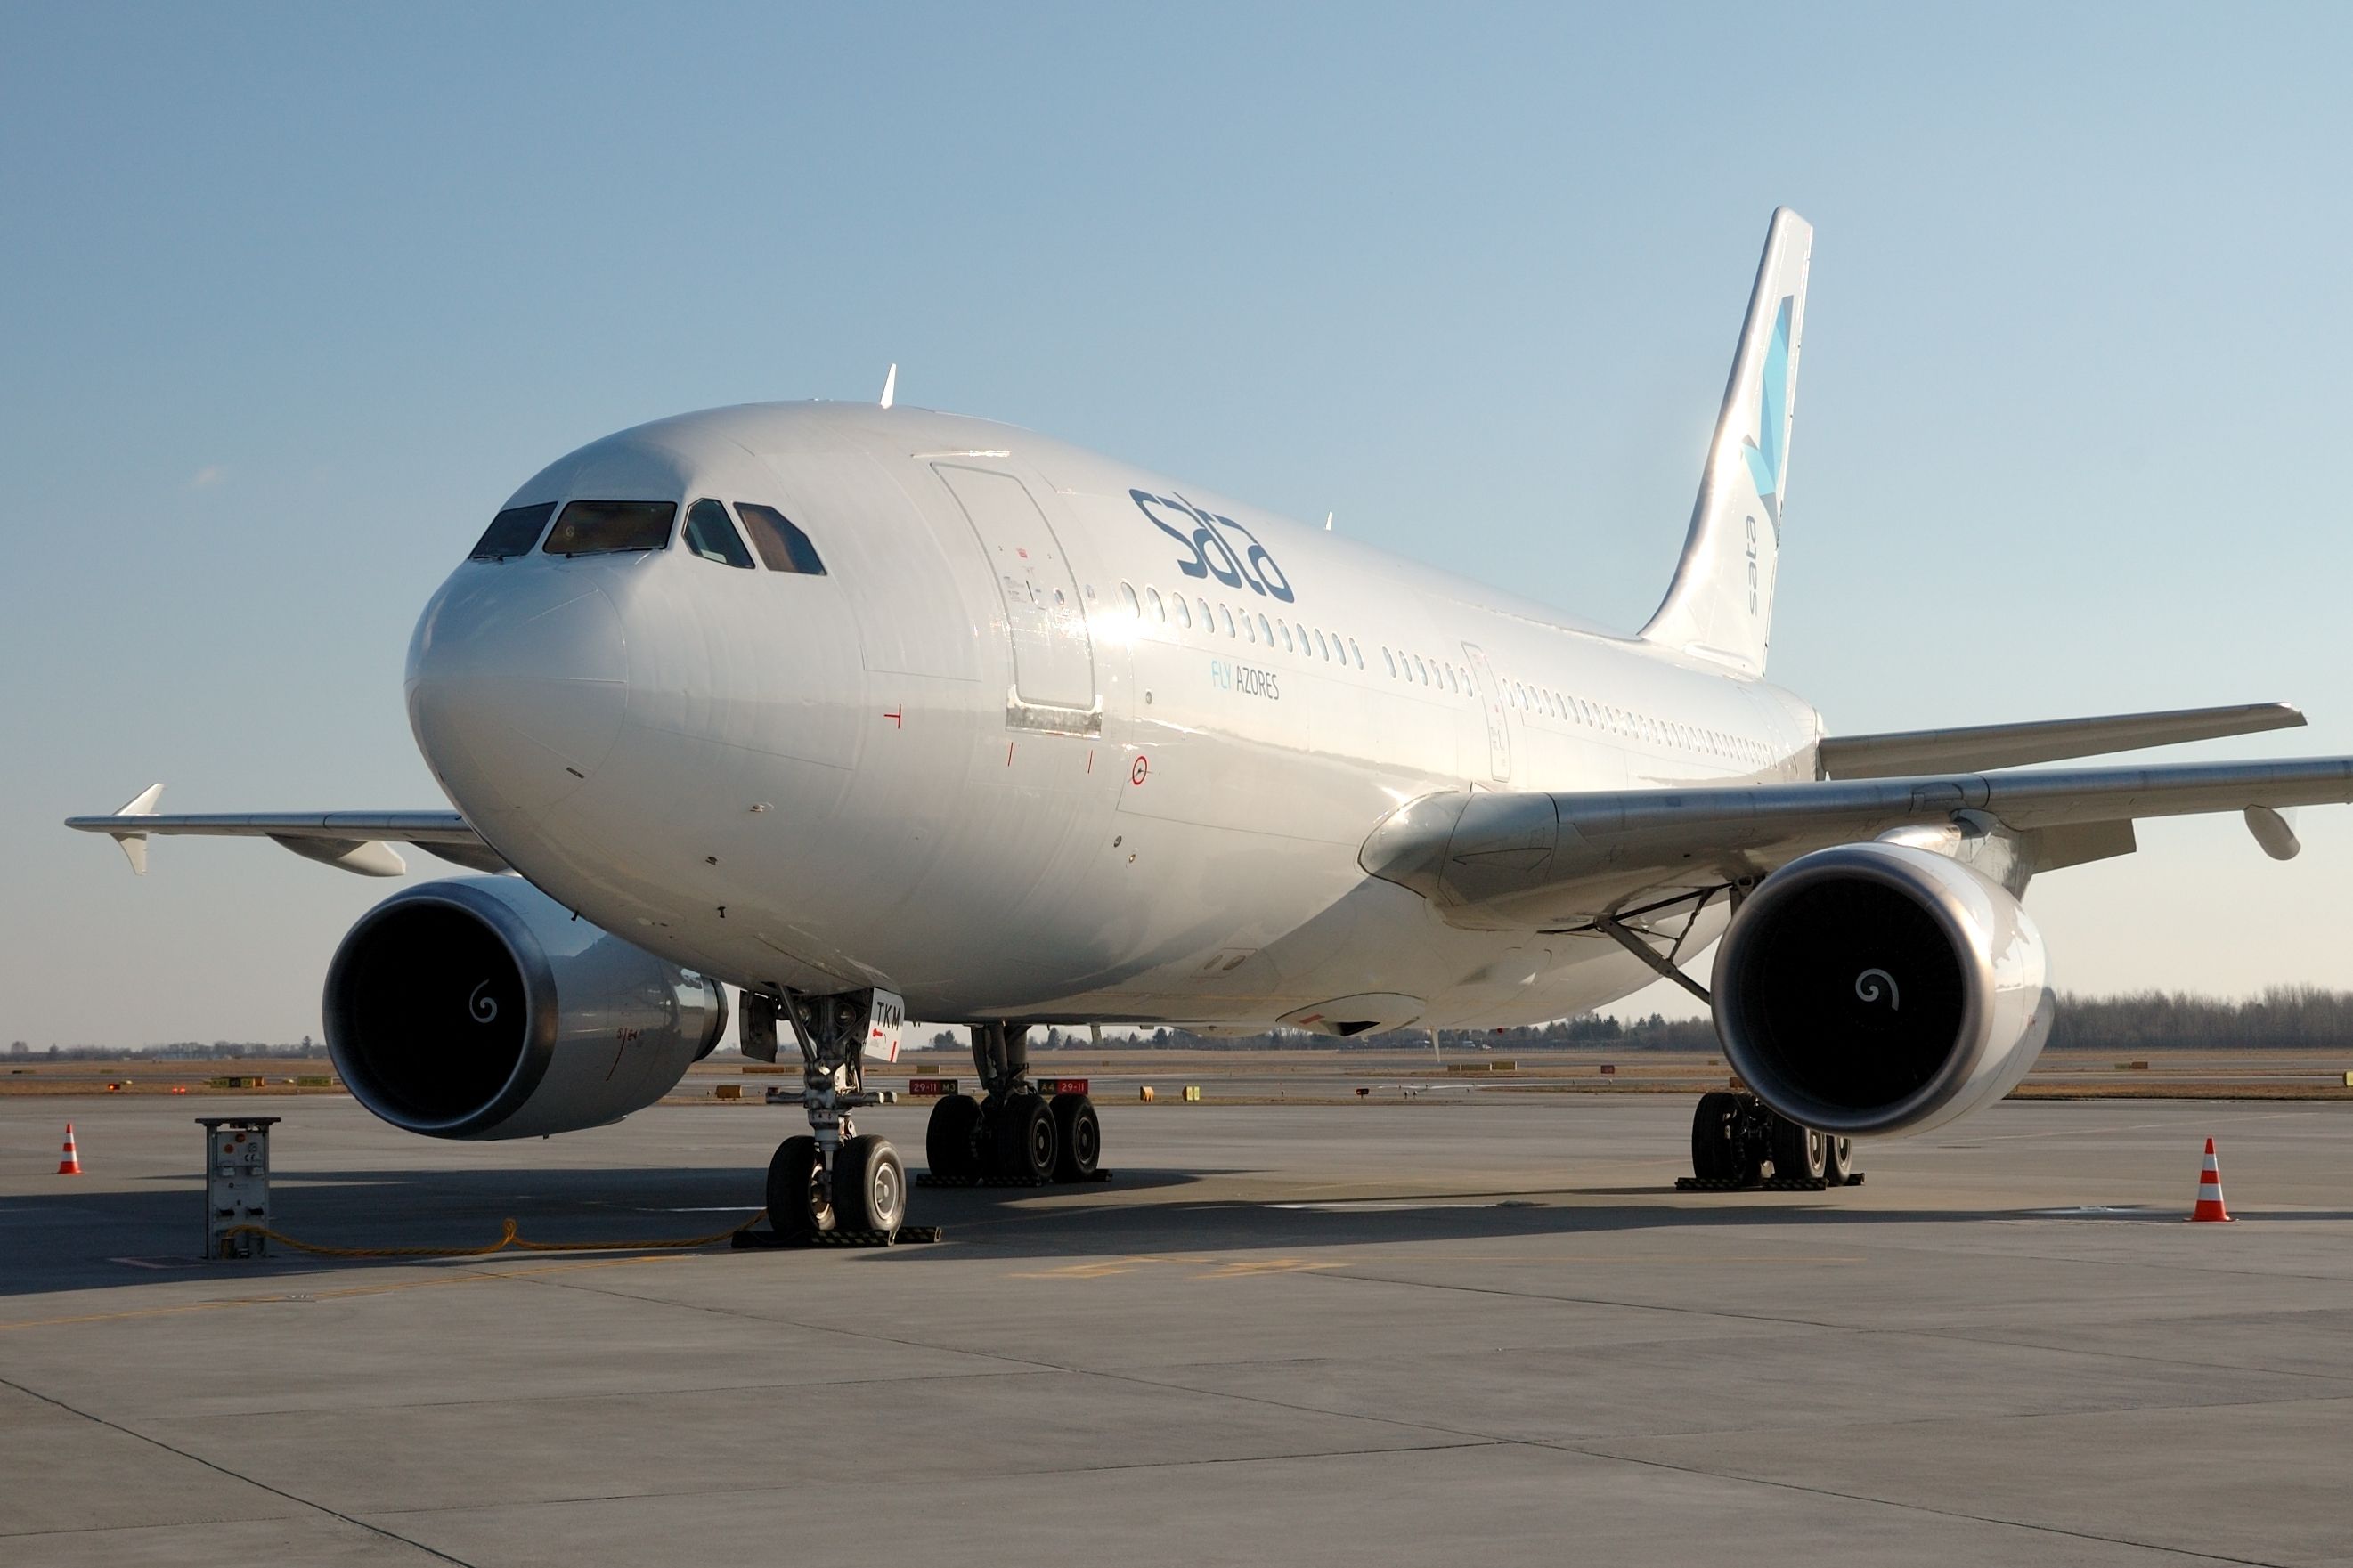 SATA Airbus A310 parked at an airfield.